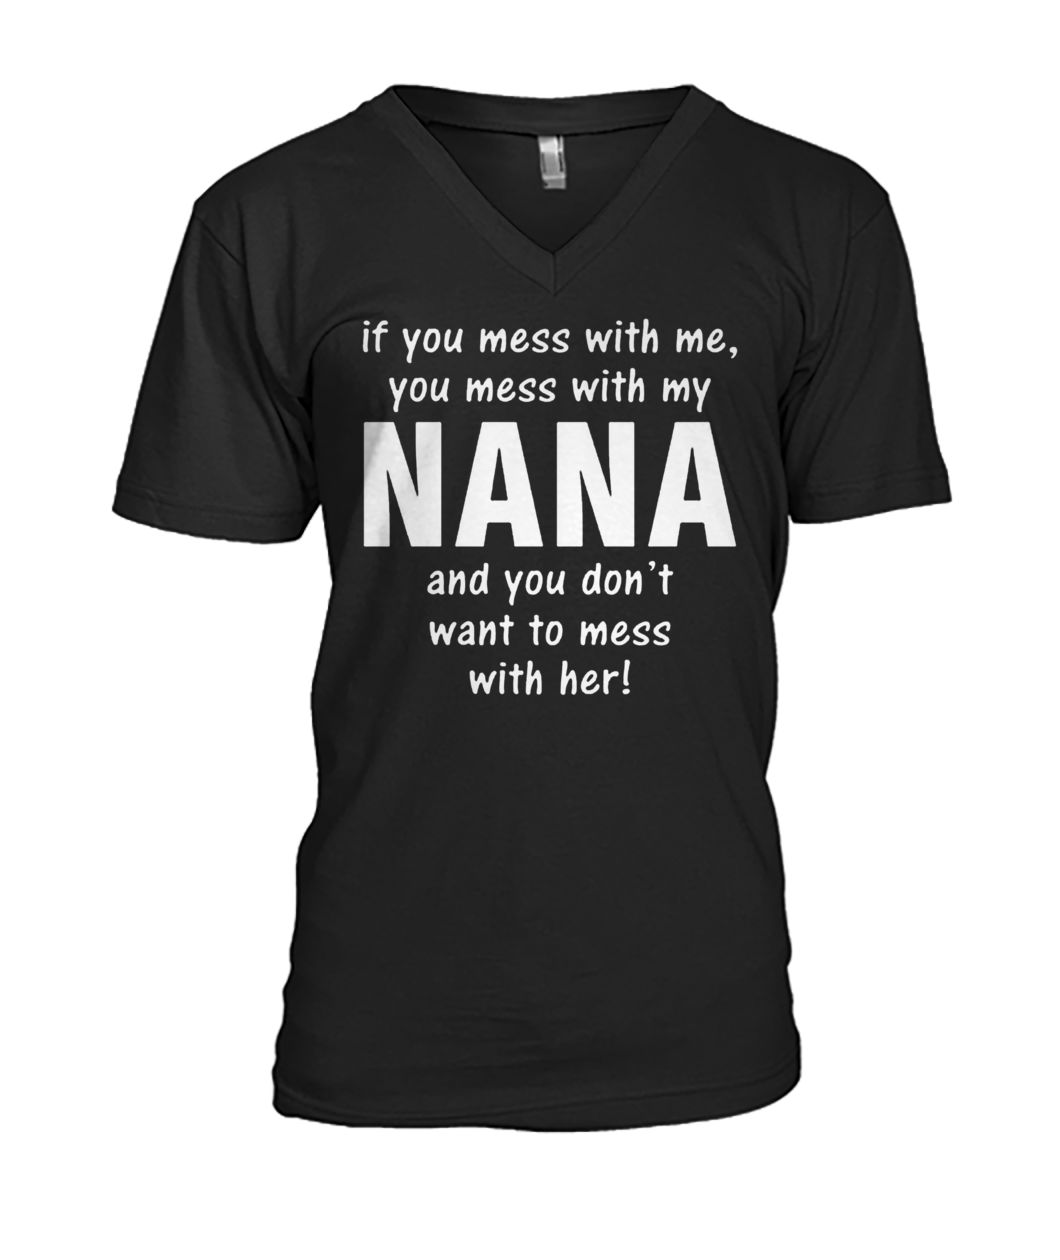 If you mess with me you mess with my nana mens v-neck